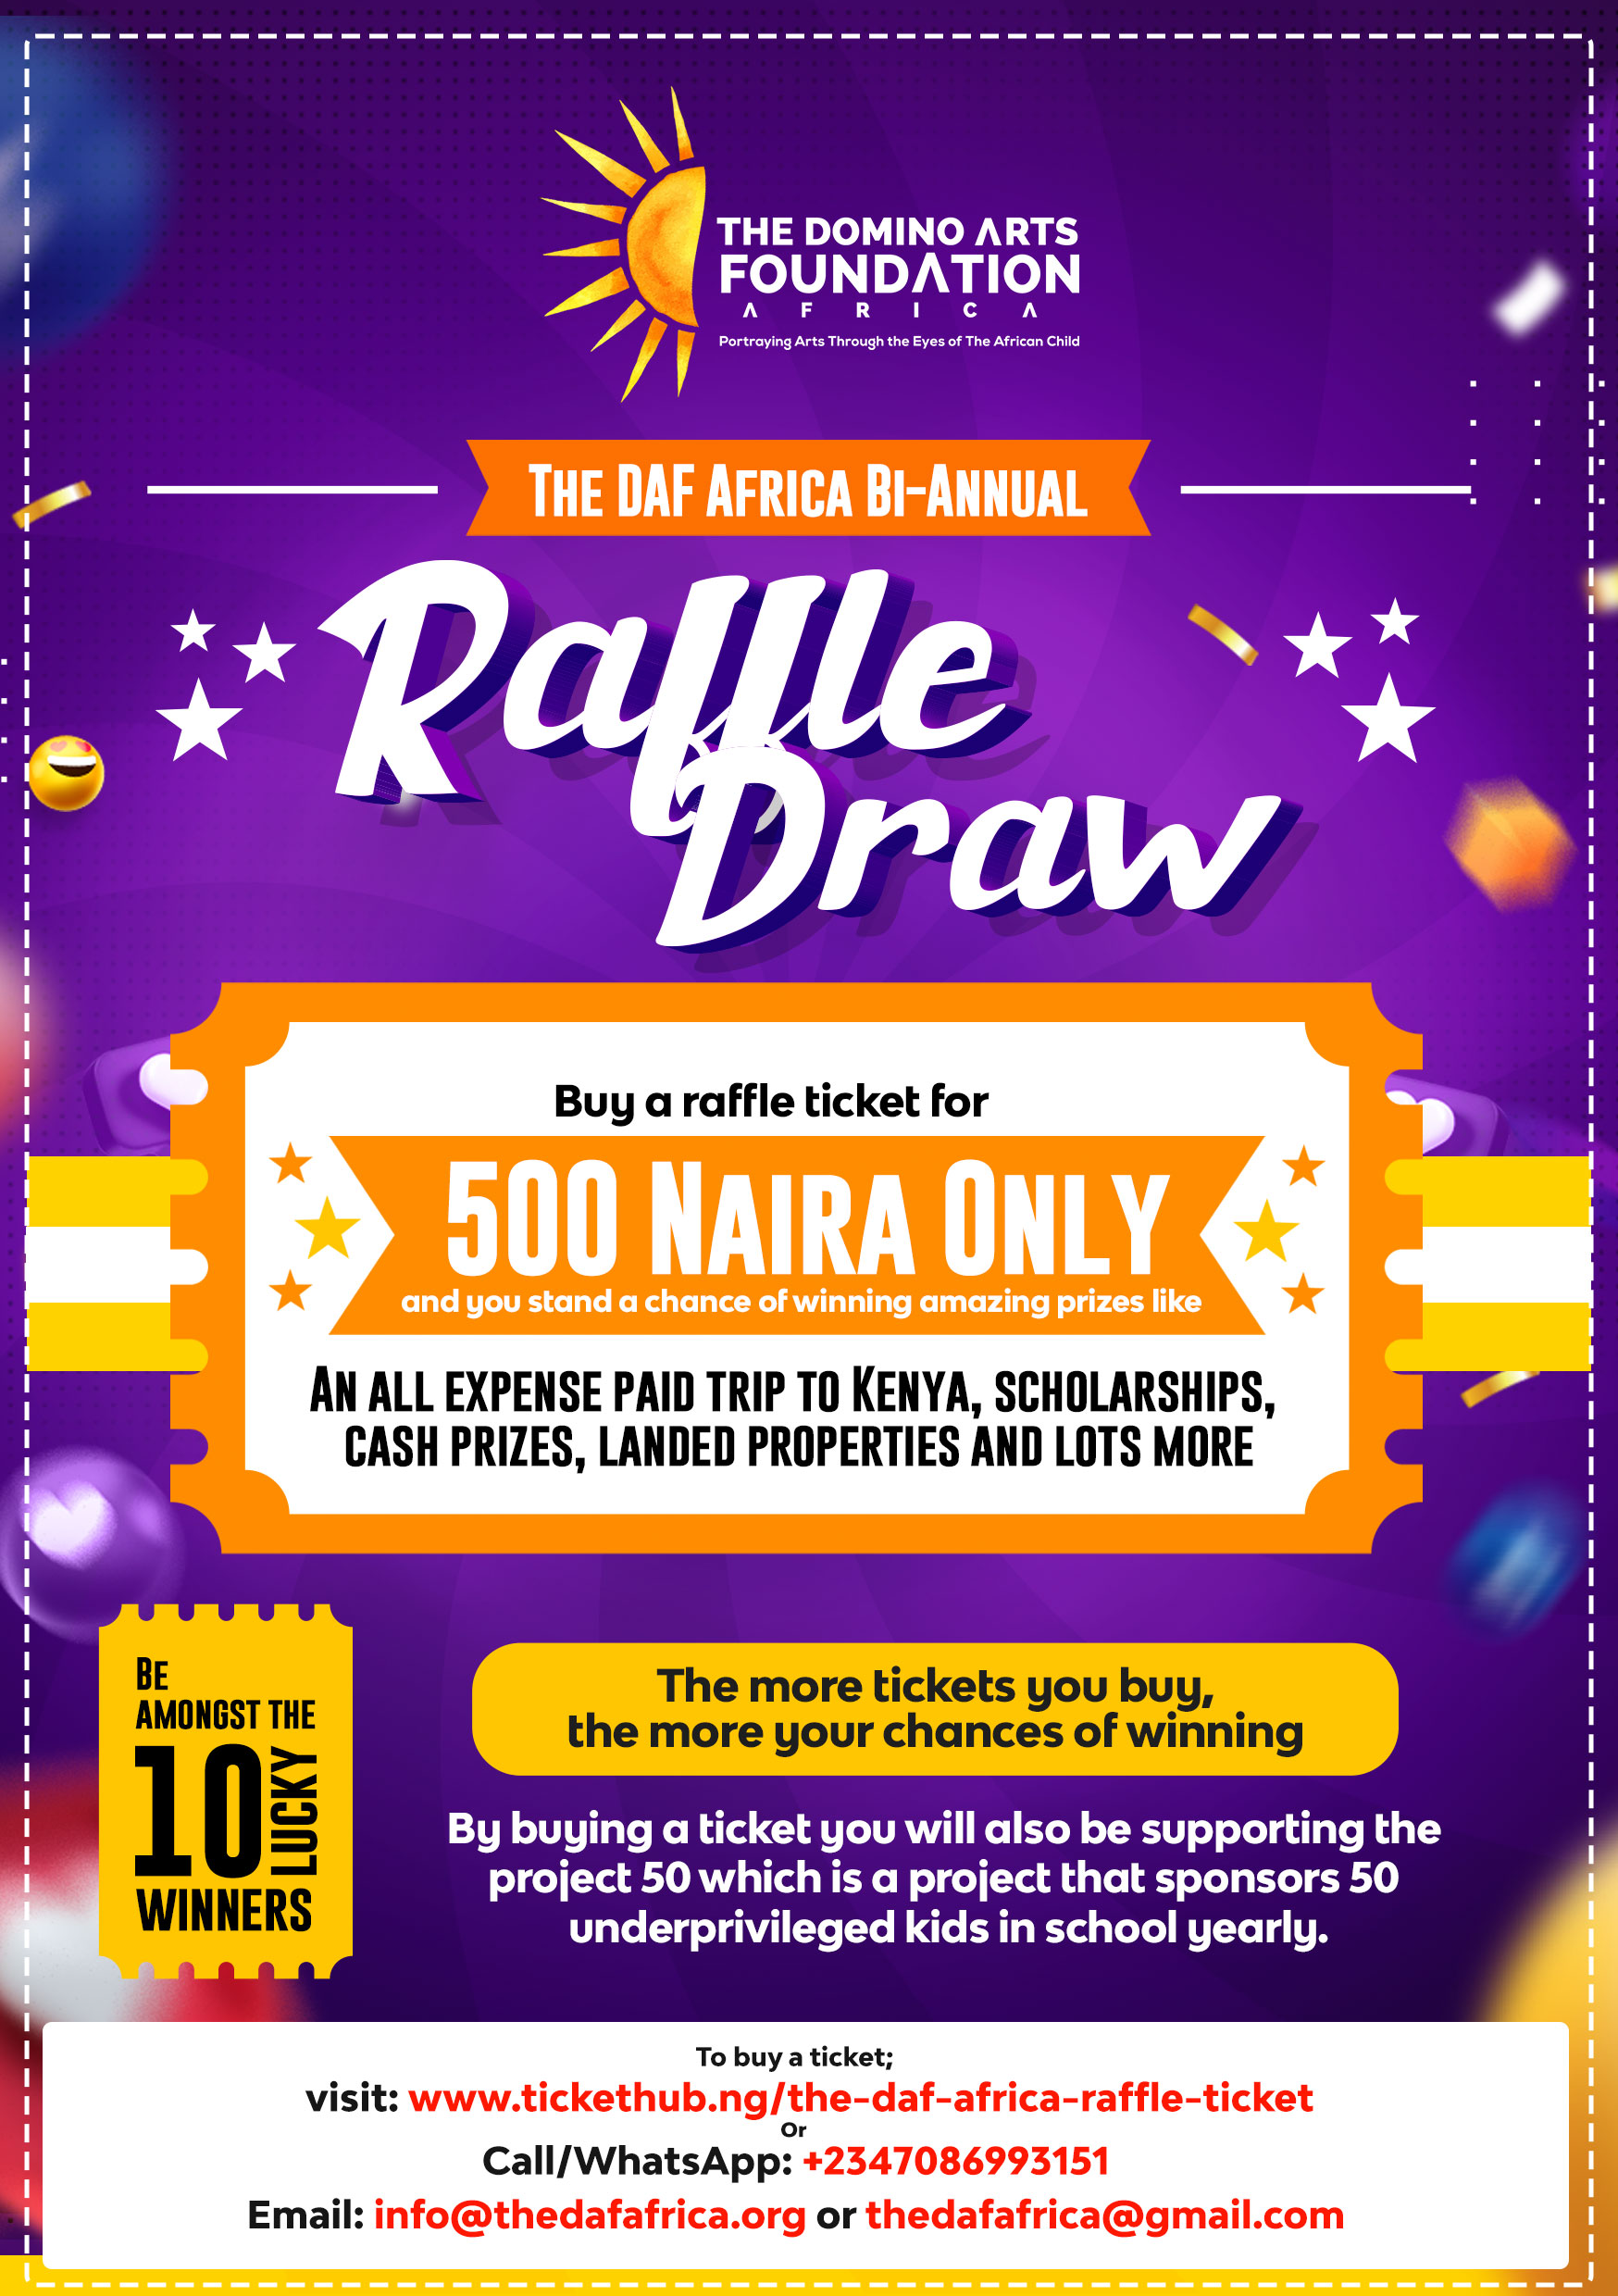 The DAF Africa Bi-Annual Raffle Draw Post free event in Nigeria using tickethub.ng, buy and sell tickets to event